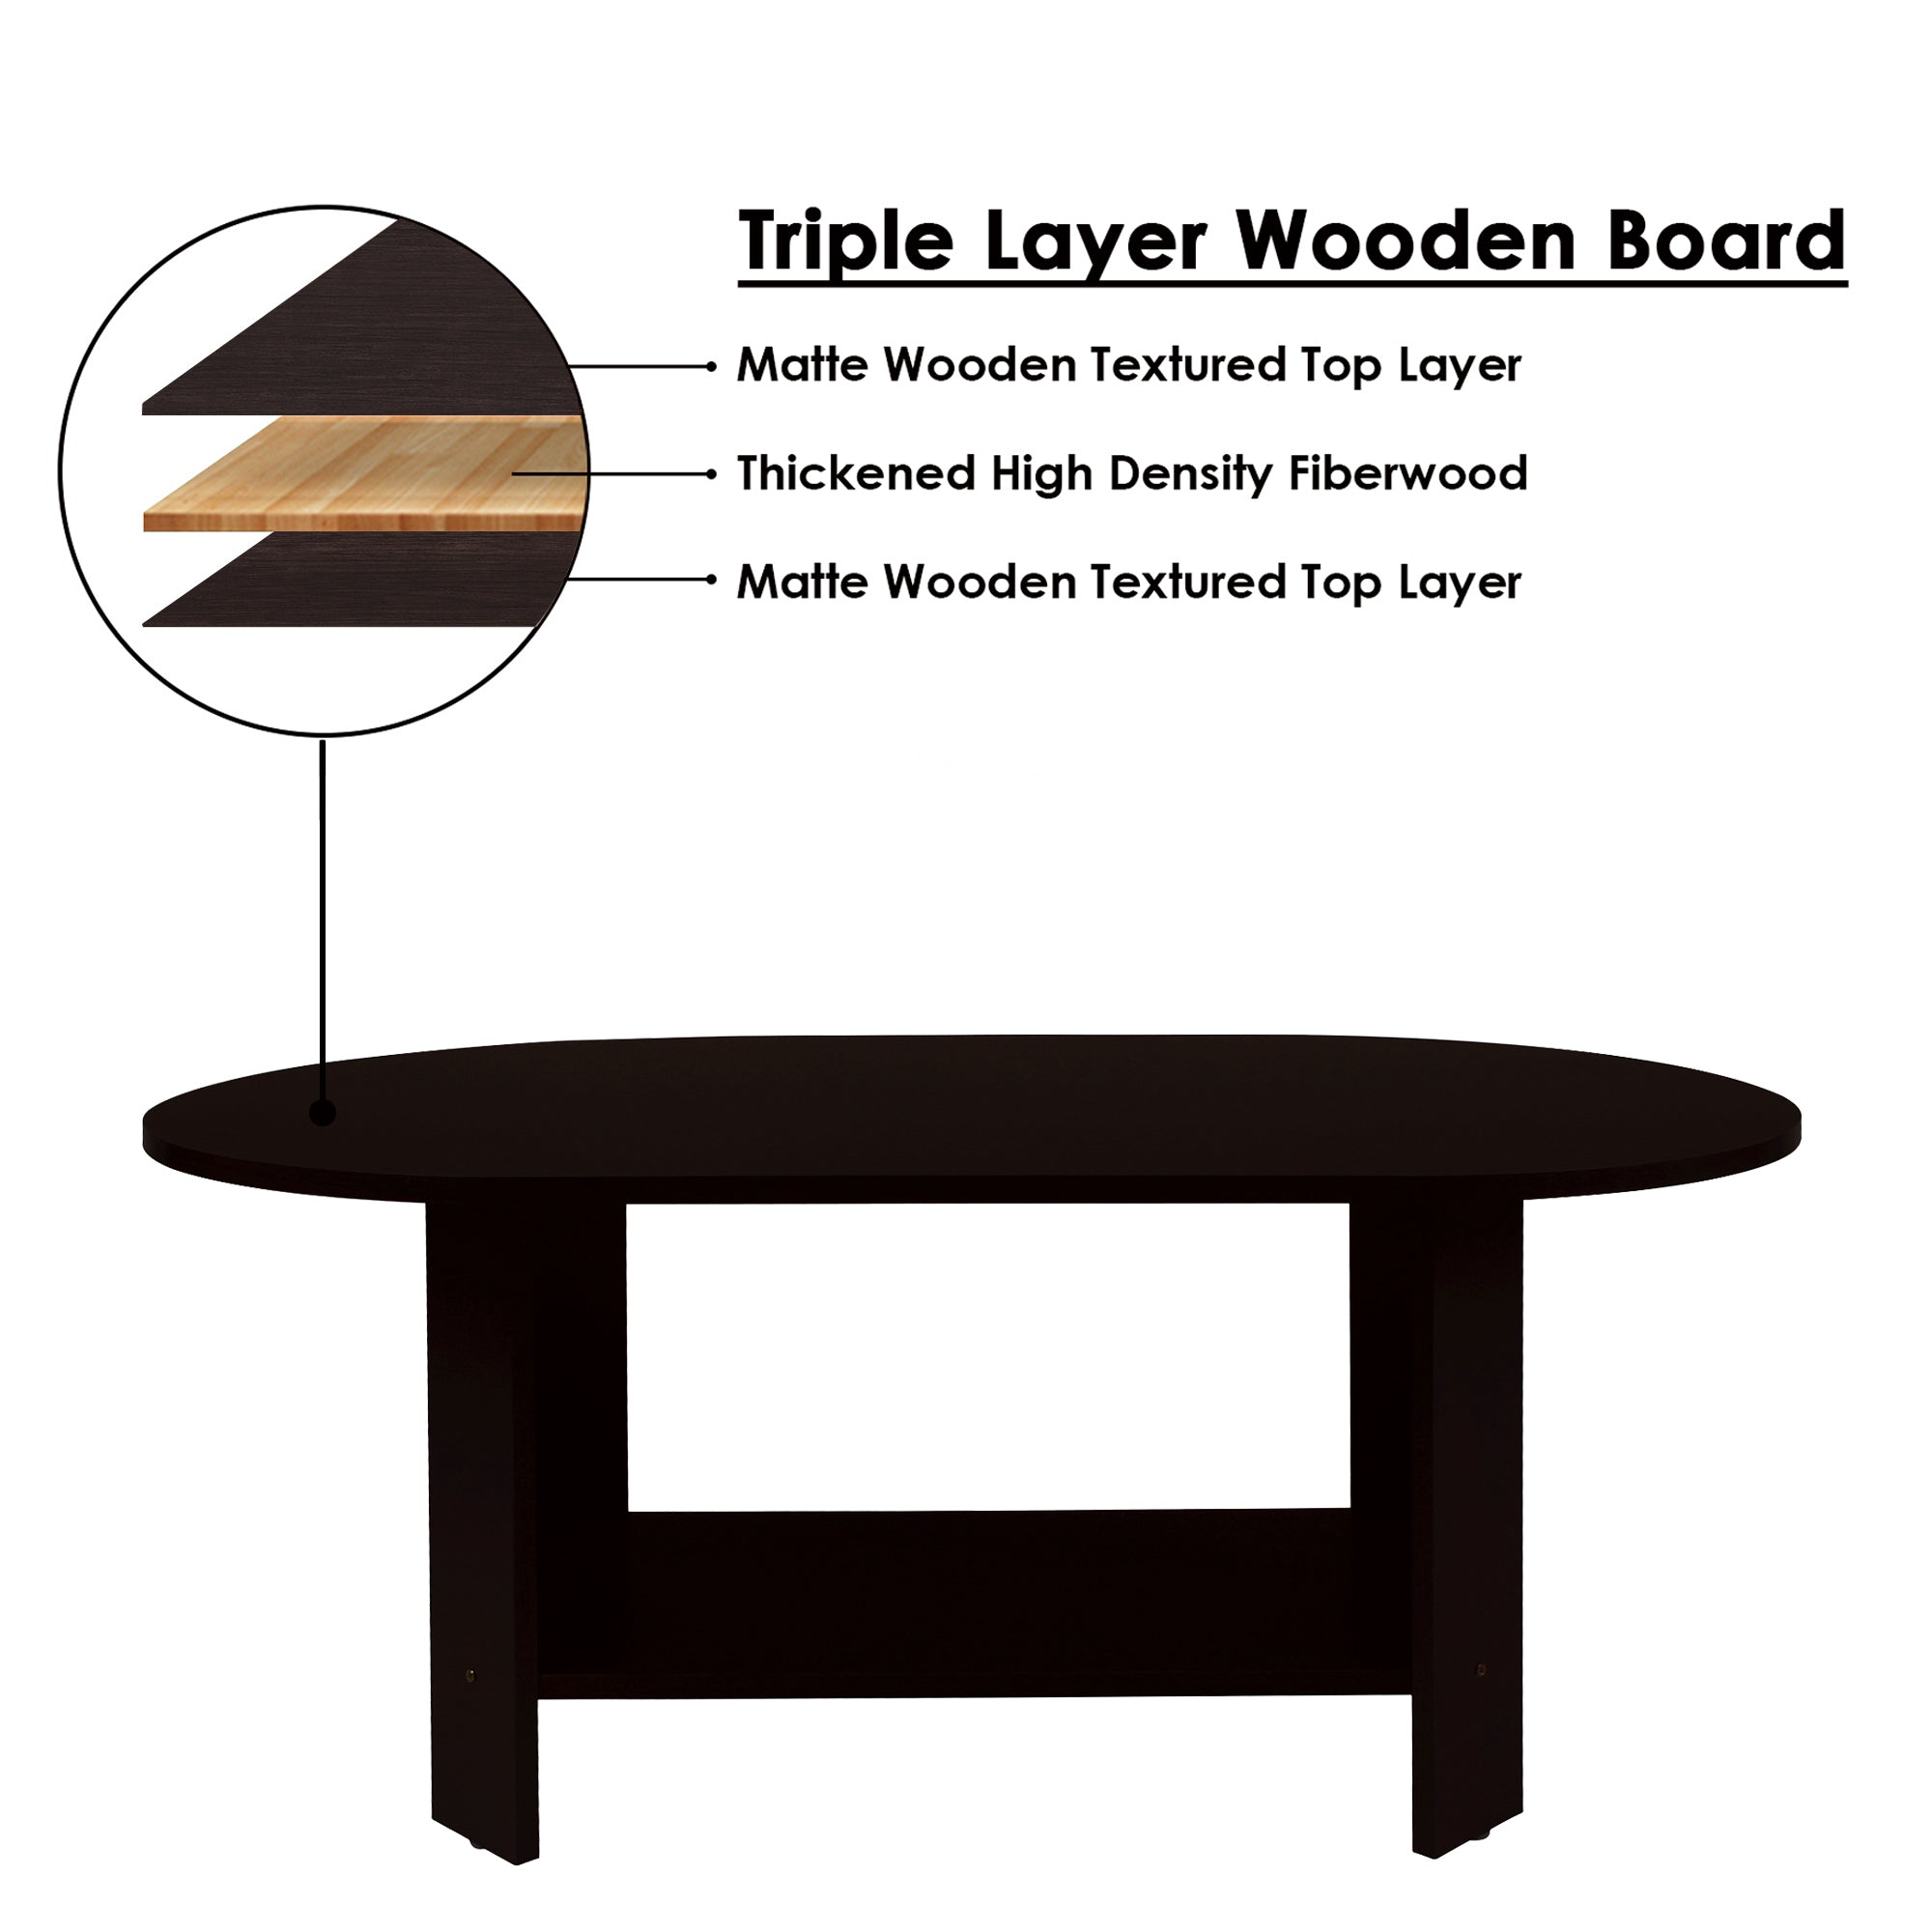 Lazywud Coffee Table For Living Room (Dark Wenge)